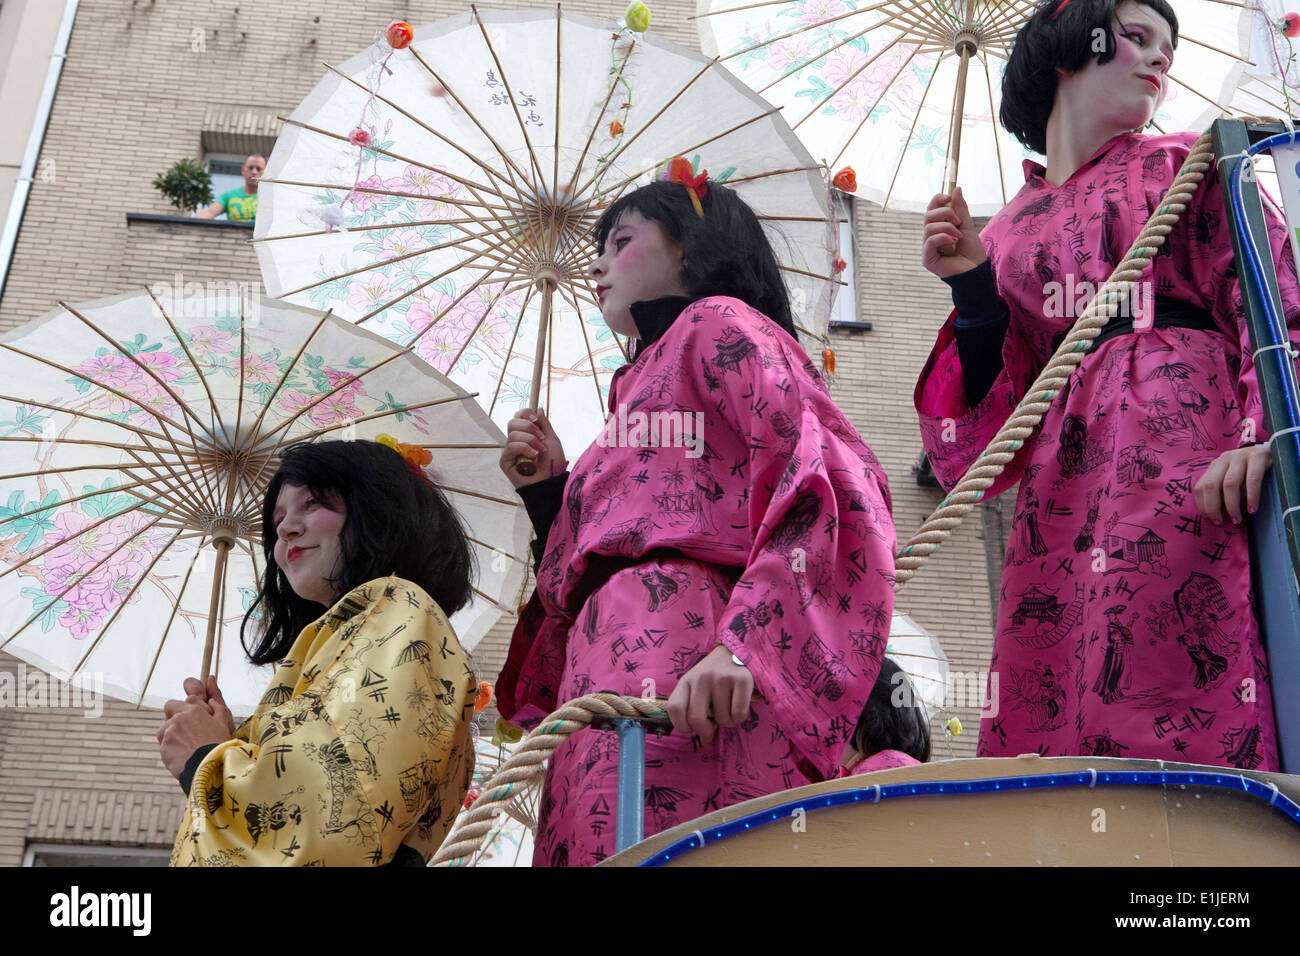 Three women in traditional Japanese kimono costumes with parasols, low angle view, Ostend Carnival, Belgium Stock Photo